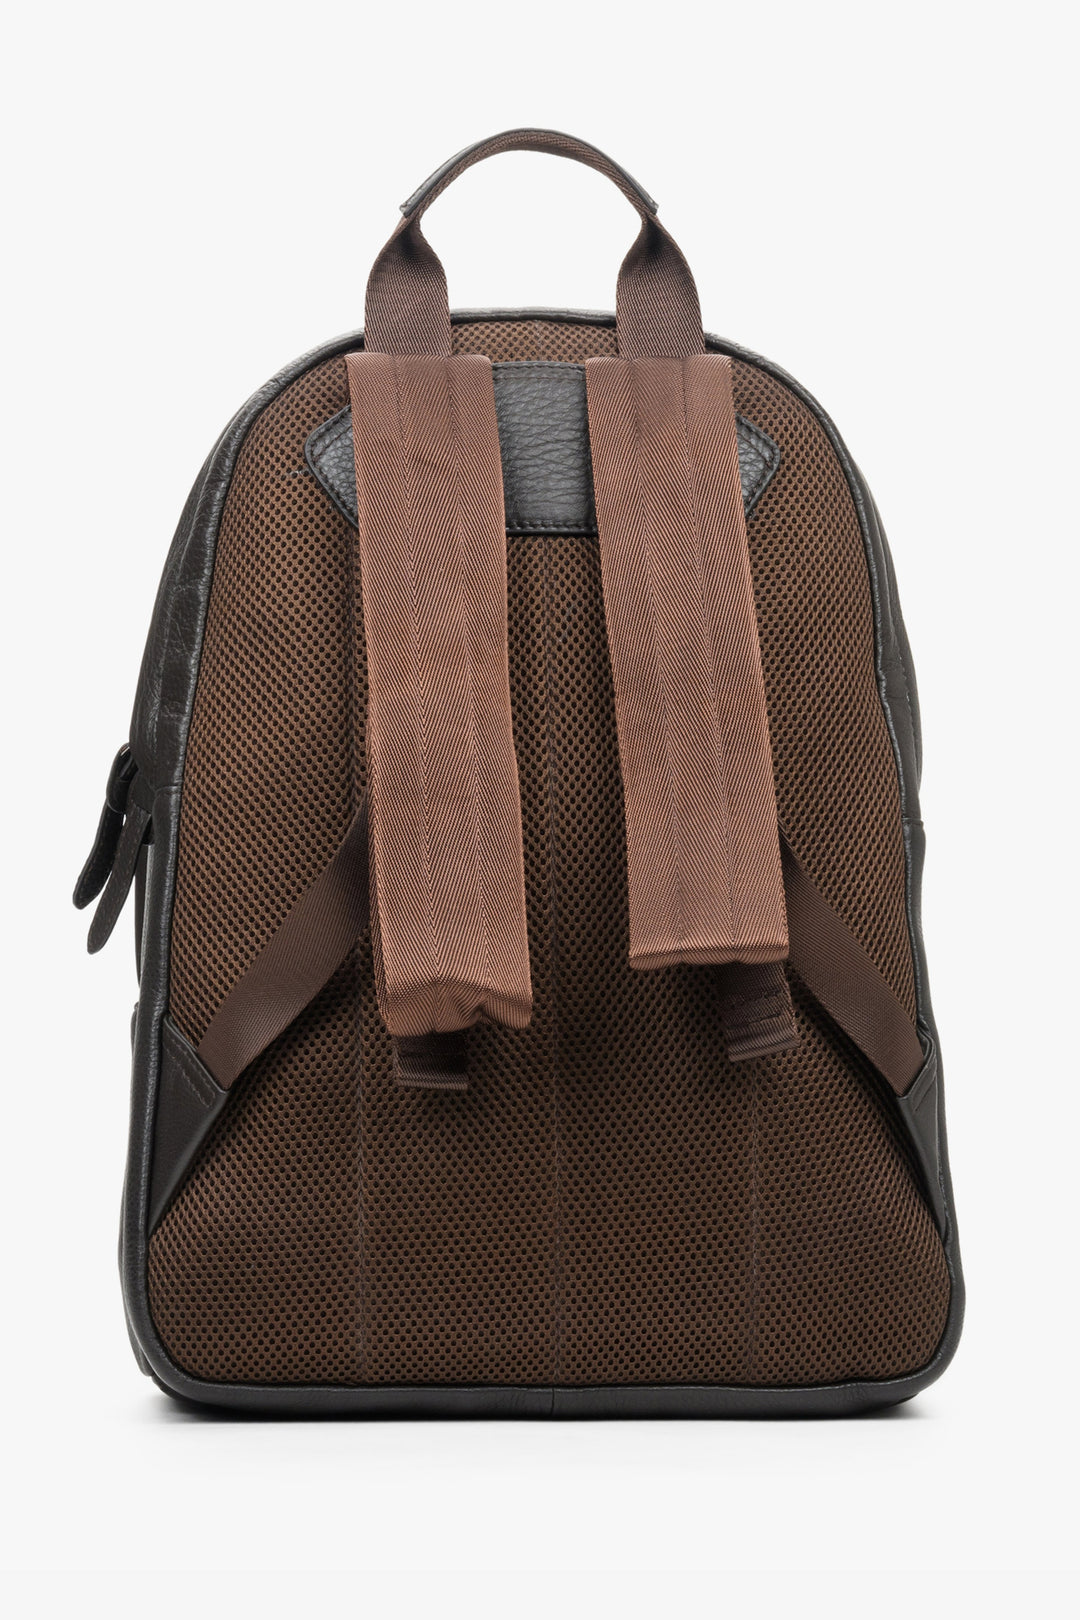 Men's large dark brown backpack made of genuine leather by Estro - close-up on the shoulder straps.